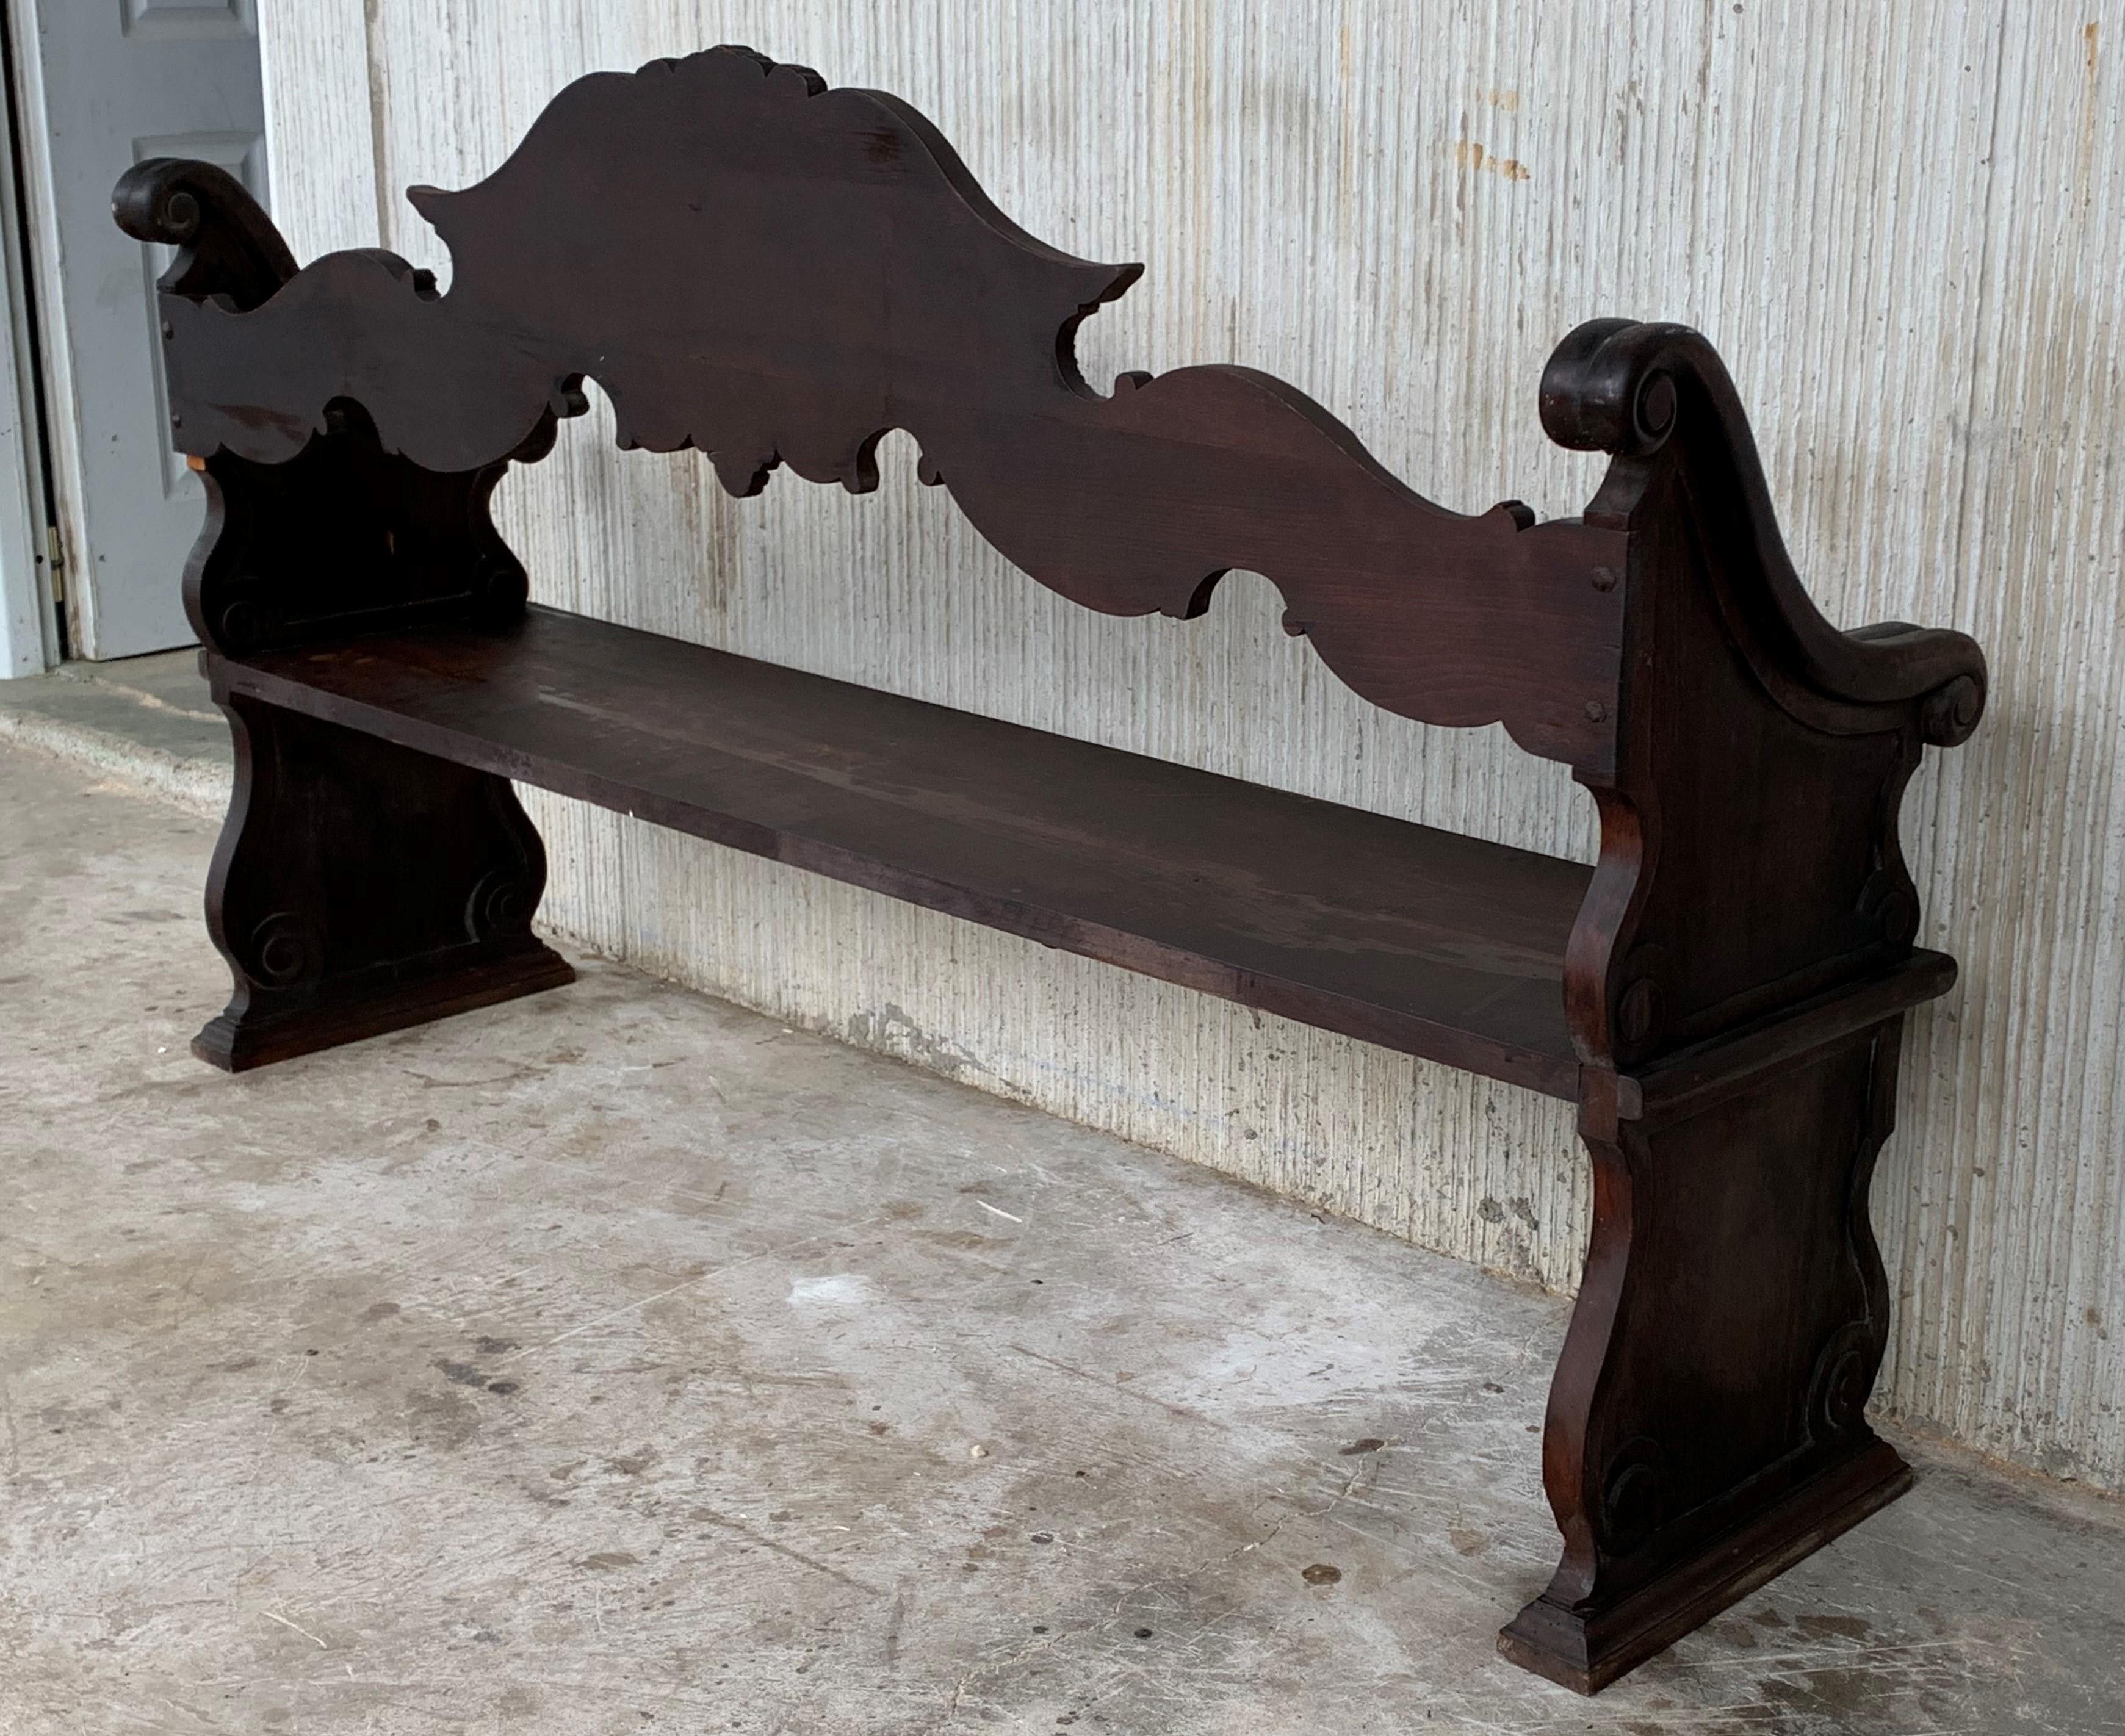 19th century French bench made from oak. The back is exquisitely hand carved with two differents motifs, surrounded by decorative carvings. The sides are made up of matching decorative pierced carvings. The seat has a beveled front edge, and the